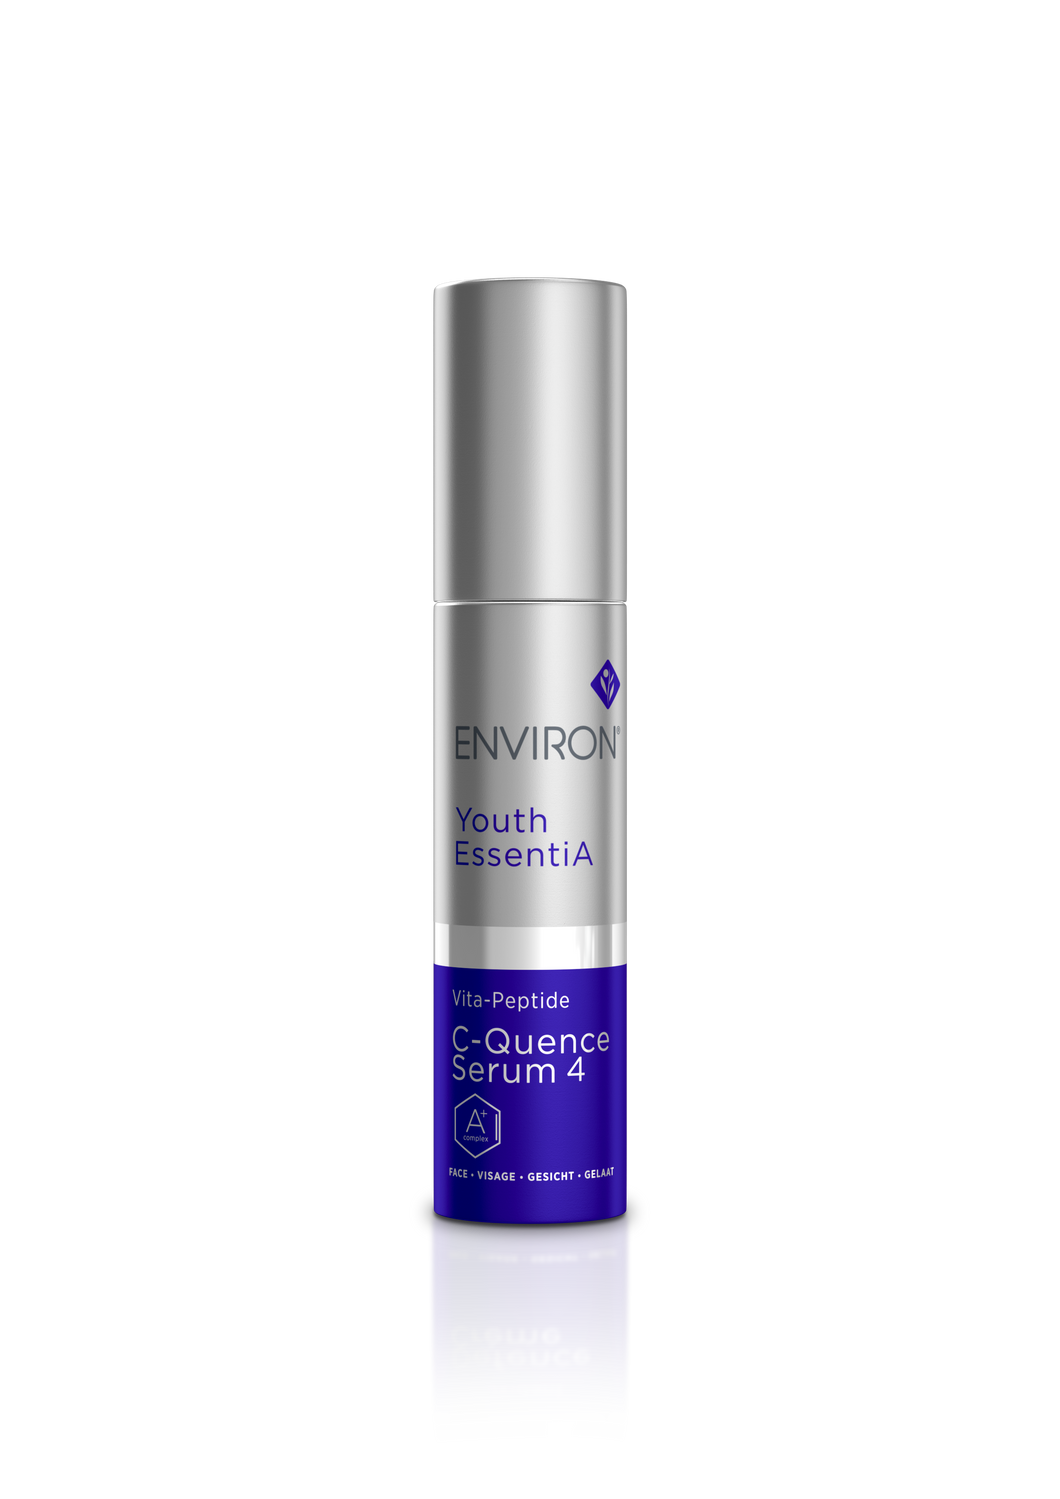 Vita Peptide C-Quence Serums 1-4 and 4 Plus